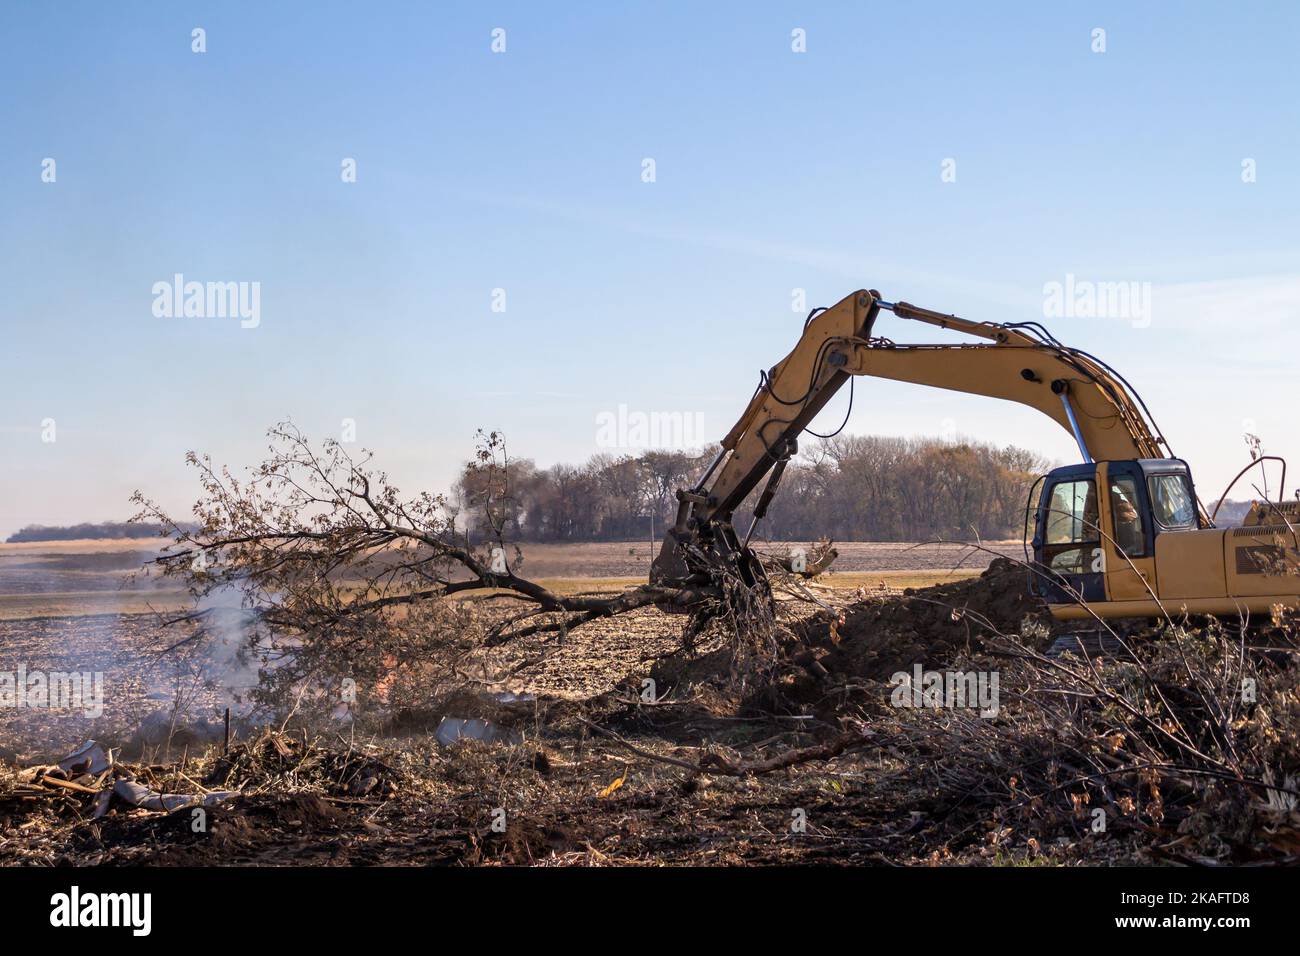 Close up view of a heavy equipment excavator moving trees and wooden debris into a fire pit near the area of a demolished old farm building Stock Photo